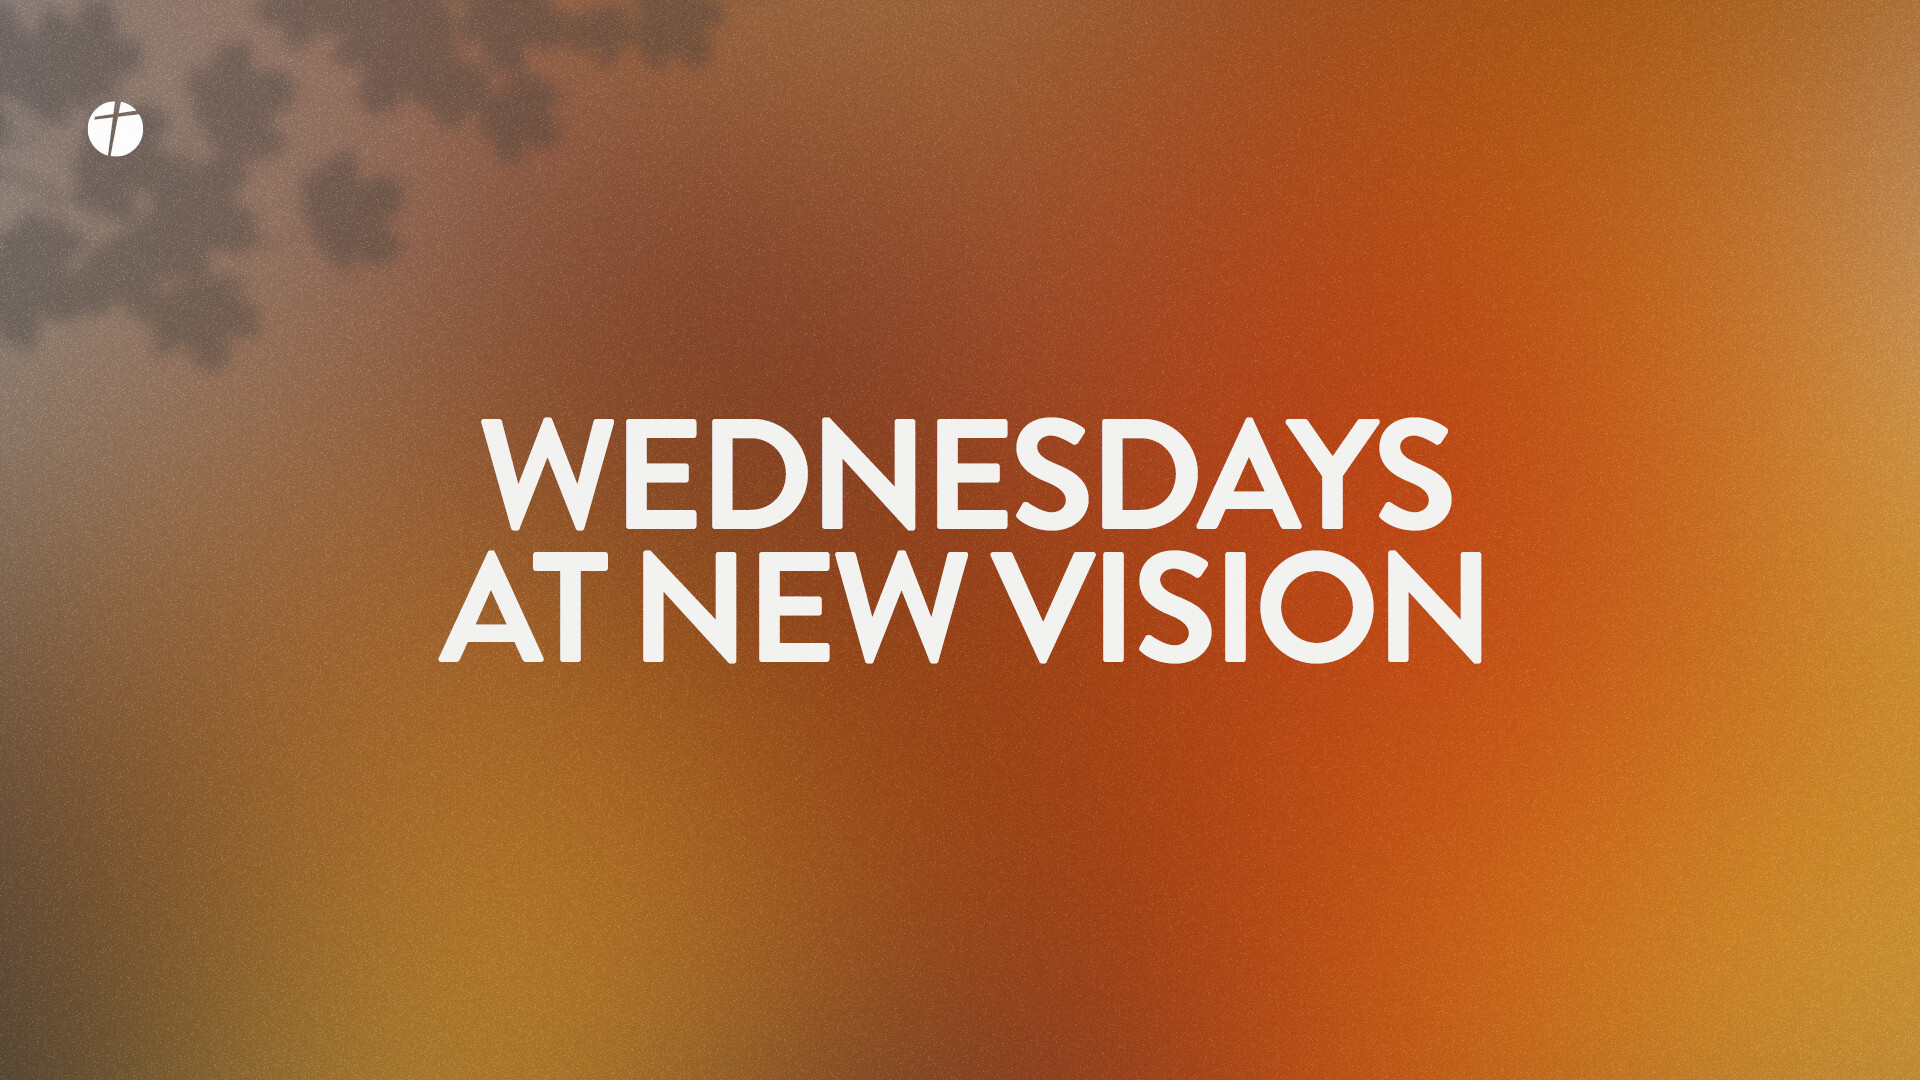 Wednesdays at New Vision